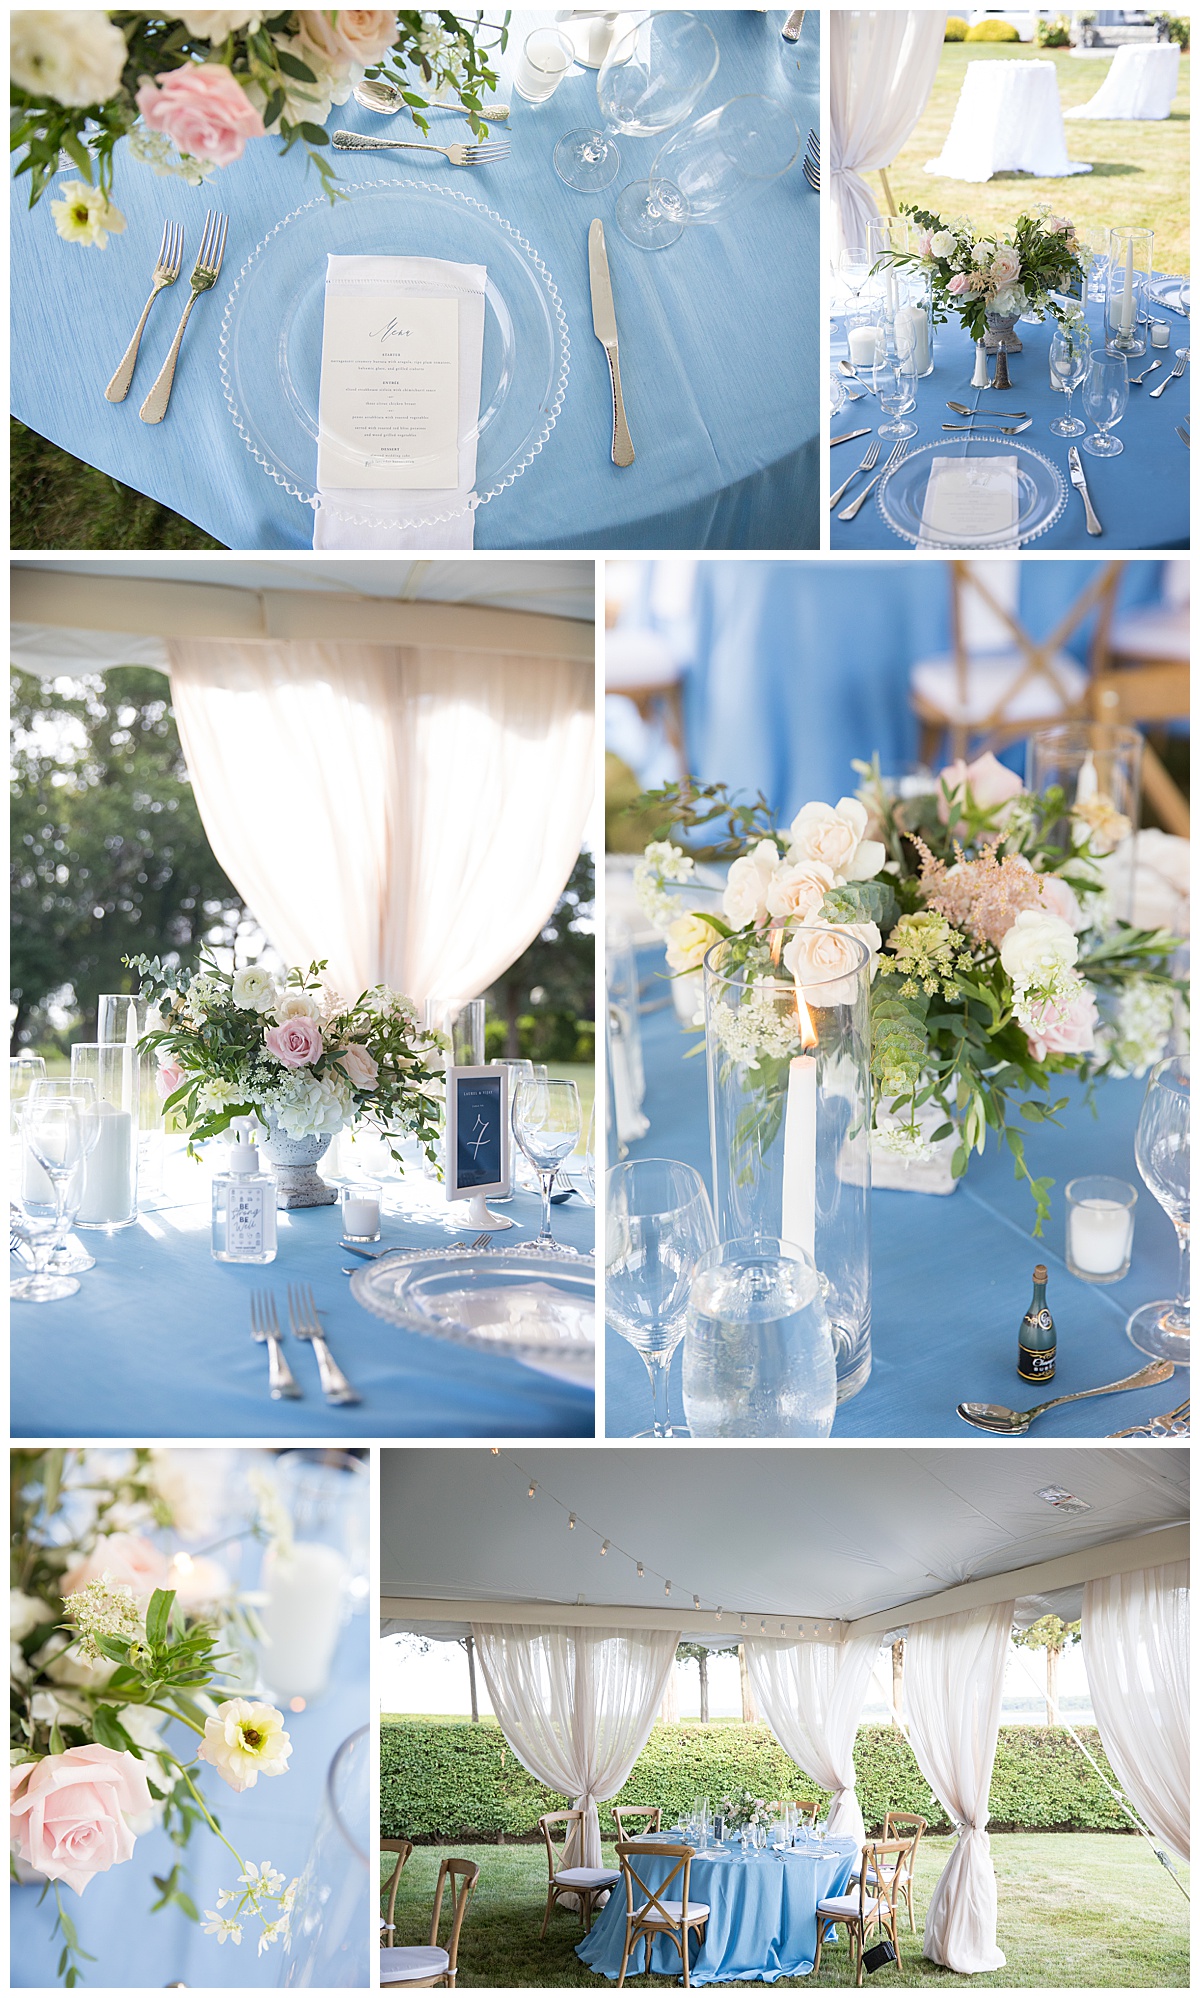 The blue decor and lush flowers enhanced the water front tent wedding in Warwick RI. 